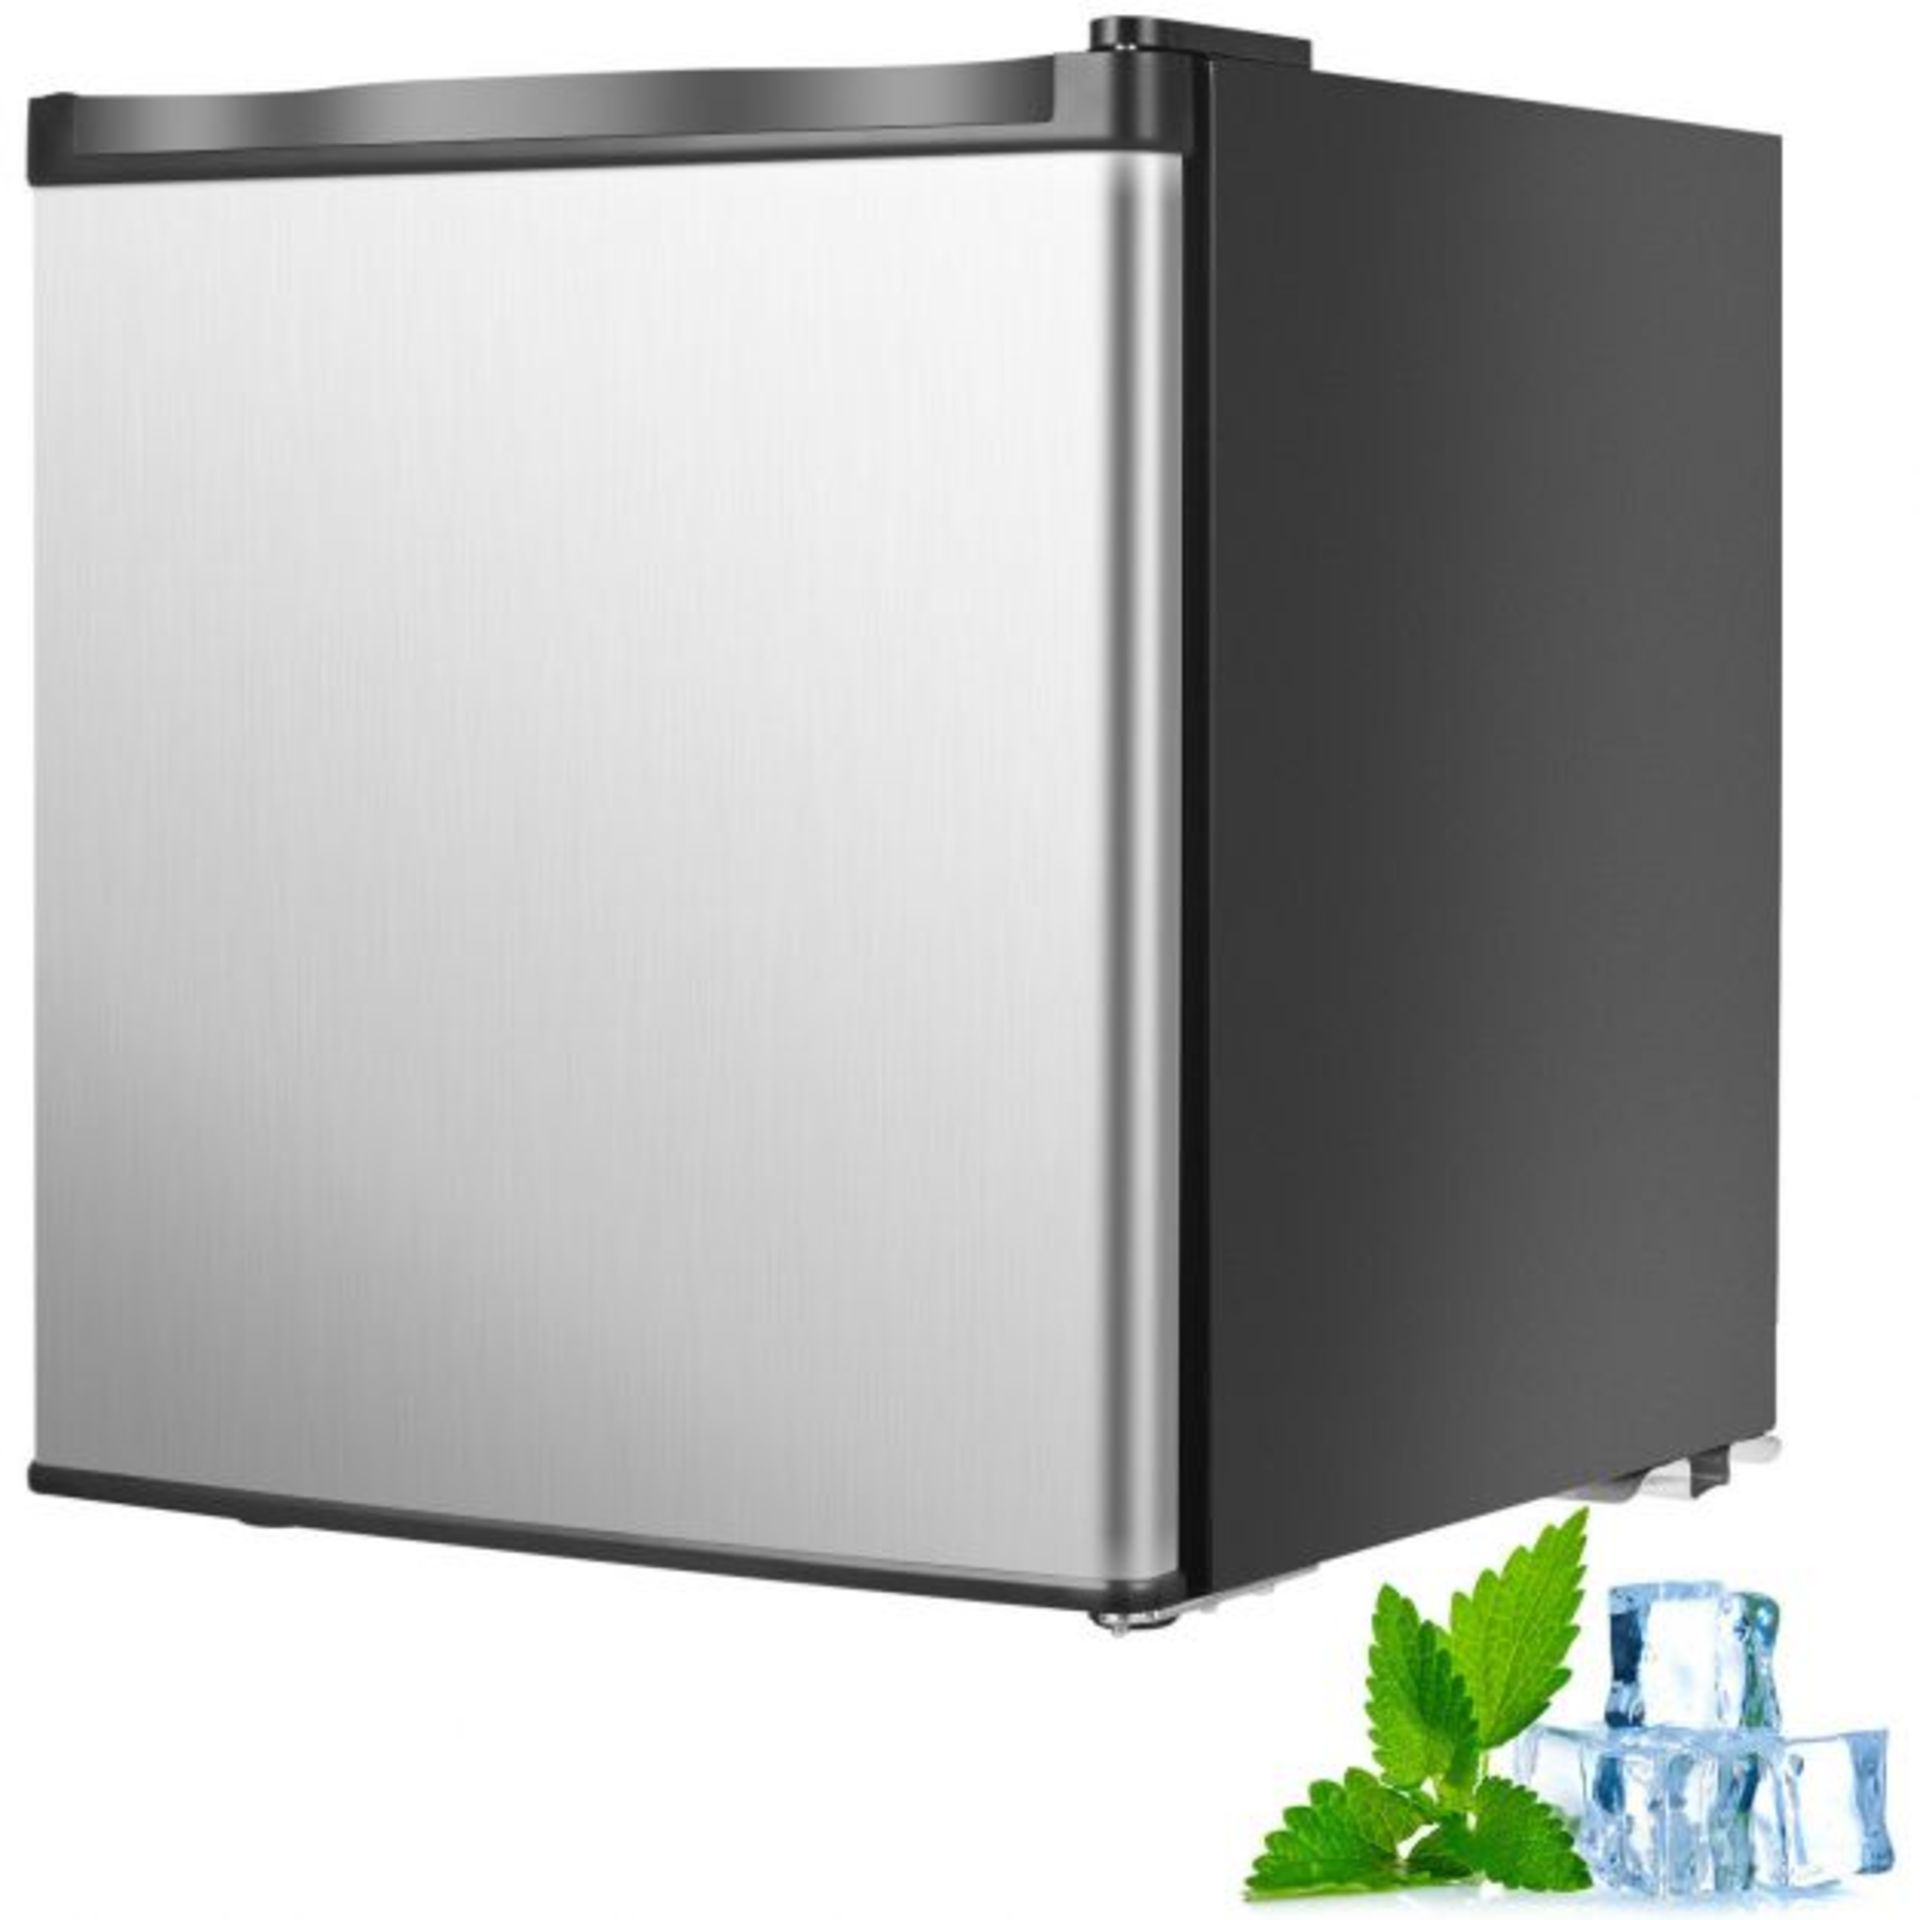 Compact 31L Portable Mini Freezer. - R14.13. Do you always have some food left and have no container